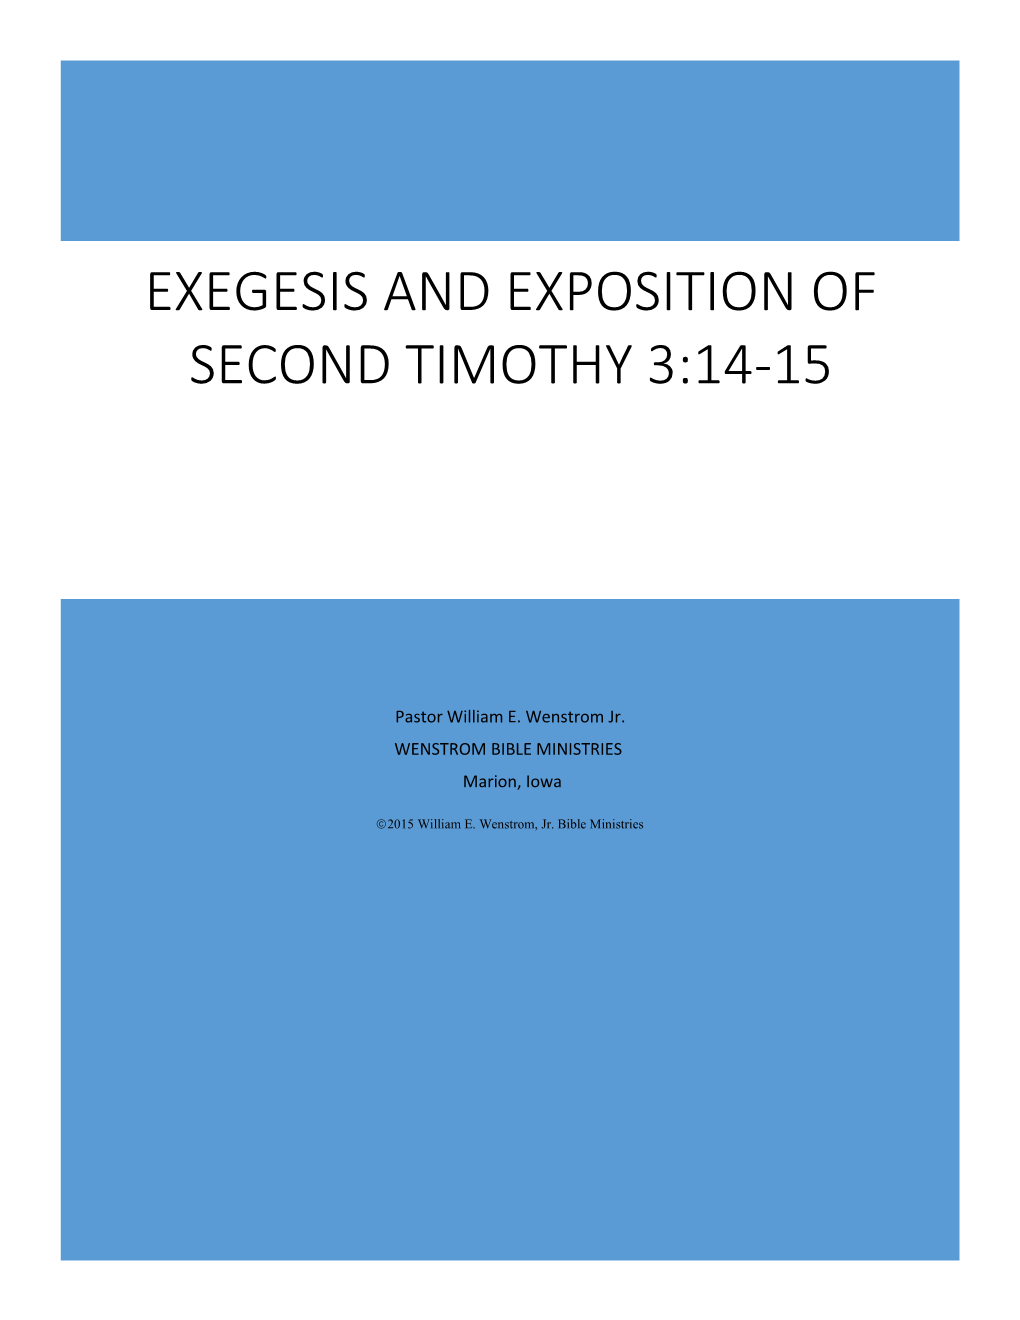 Exegesis and Exposition of Second Timothy 3:14-15